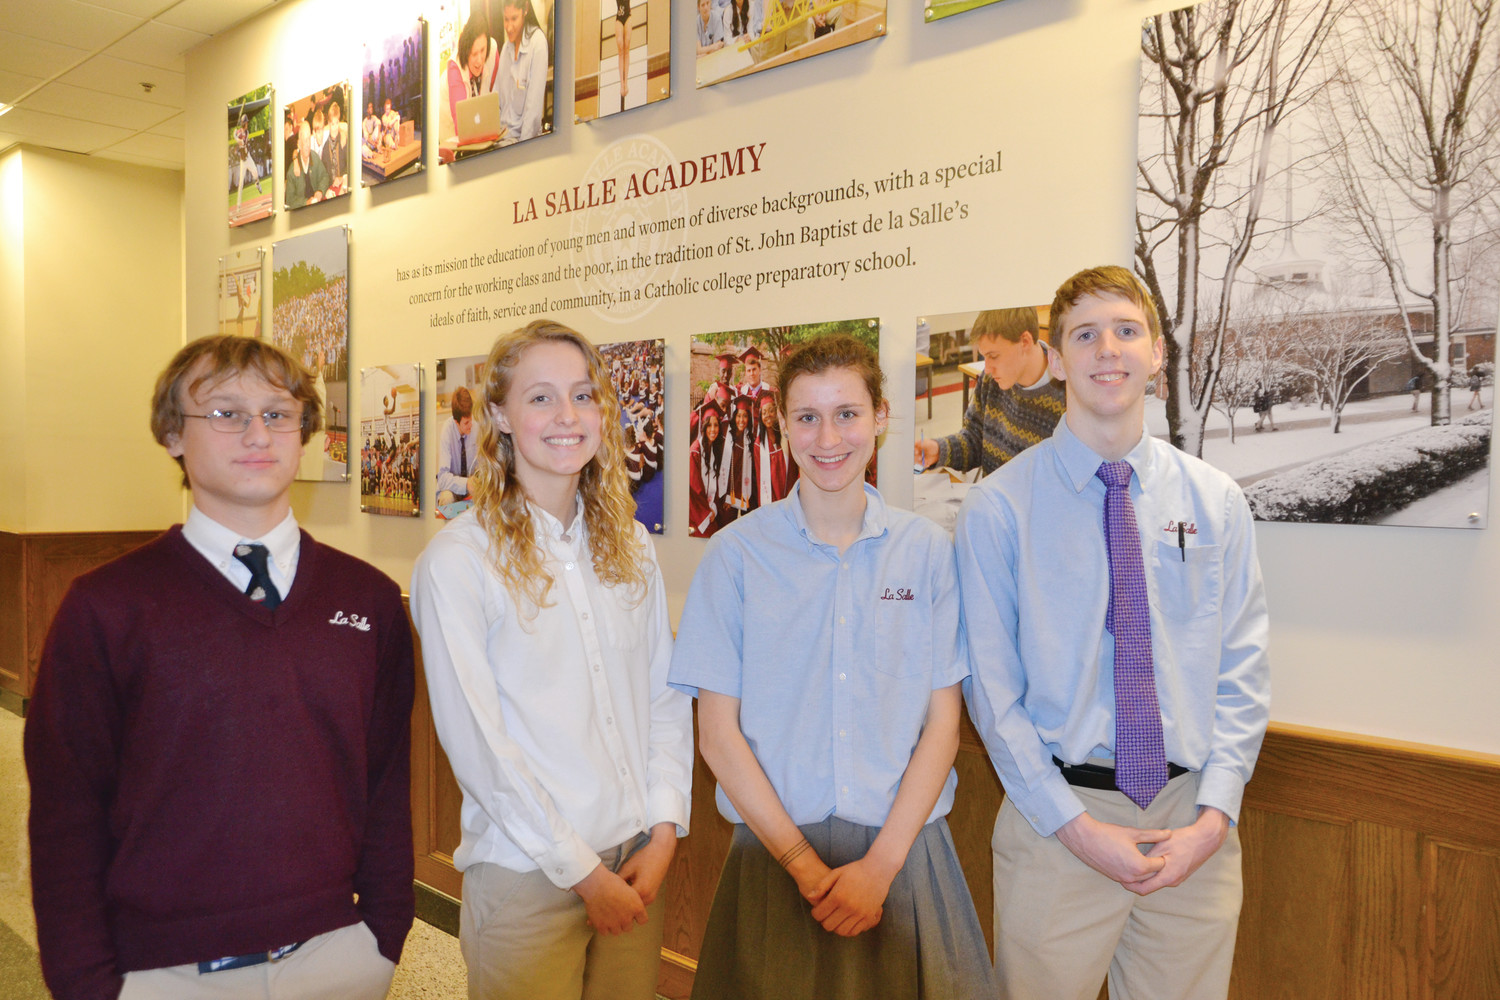 Pictured from left to right are James Linklater Truslow VI, Madalyn J. Redding, Grace T. Connolly, and Timothy J. Nigro.